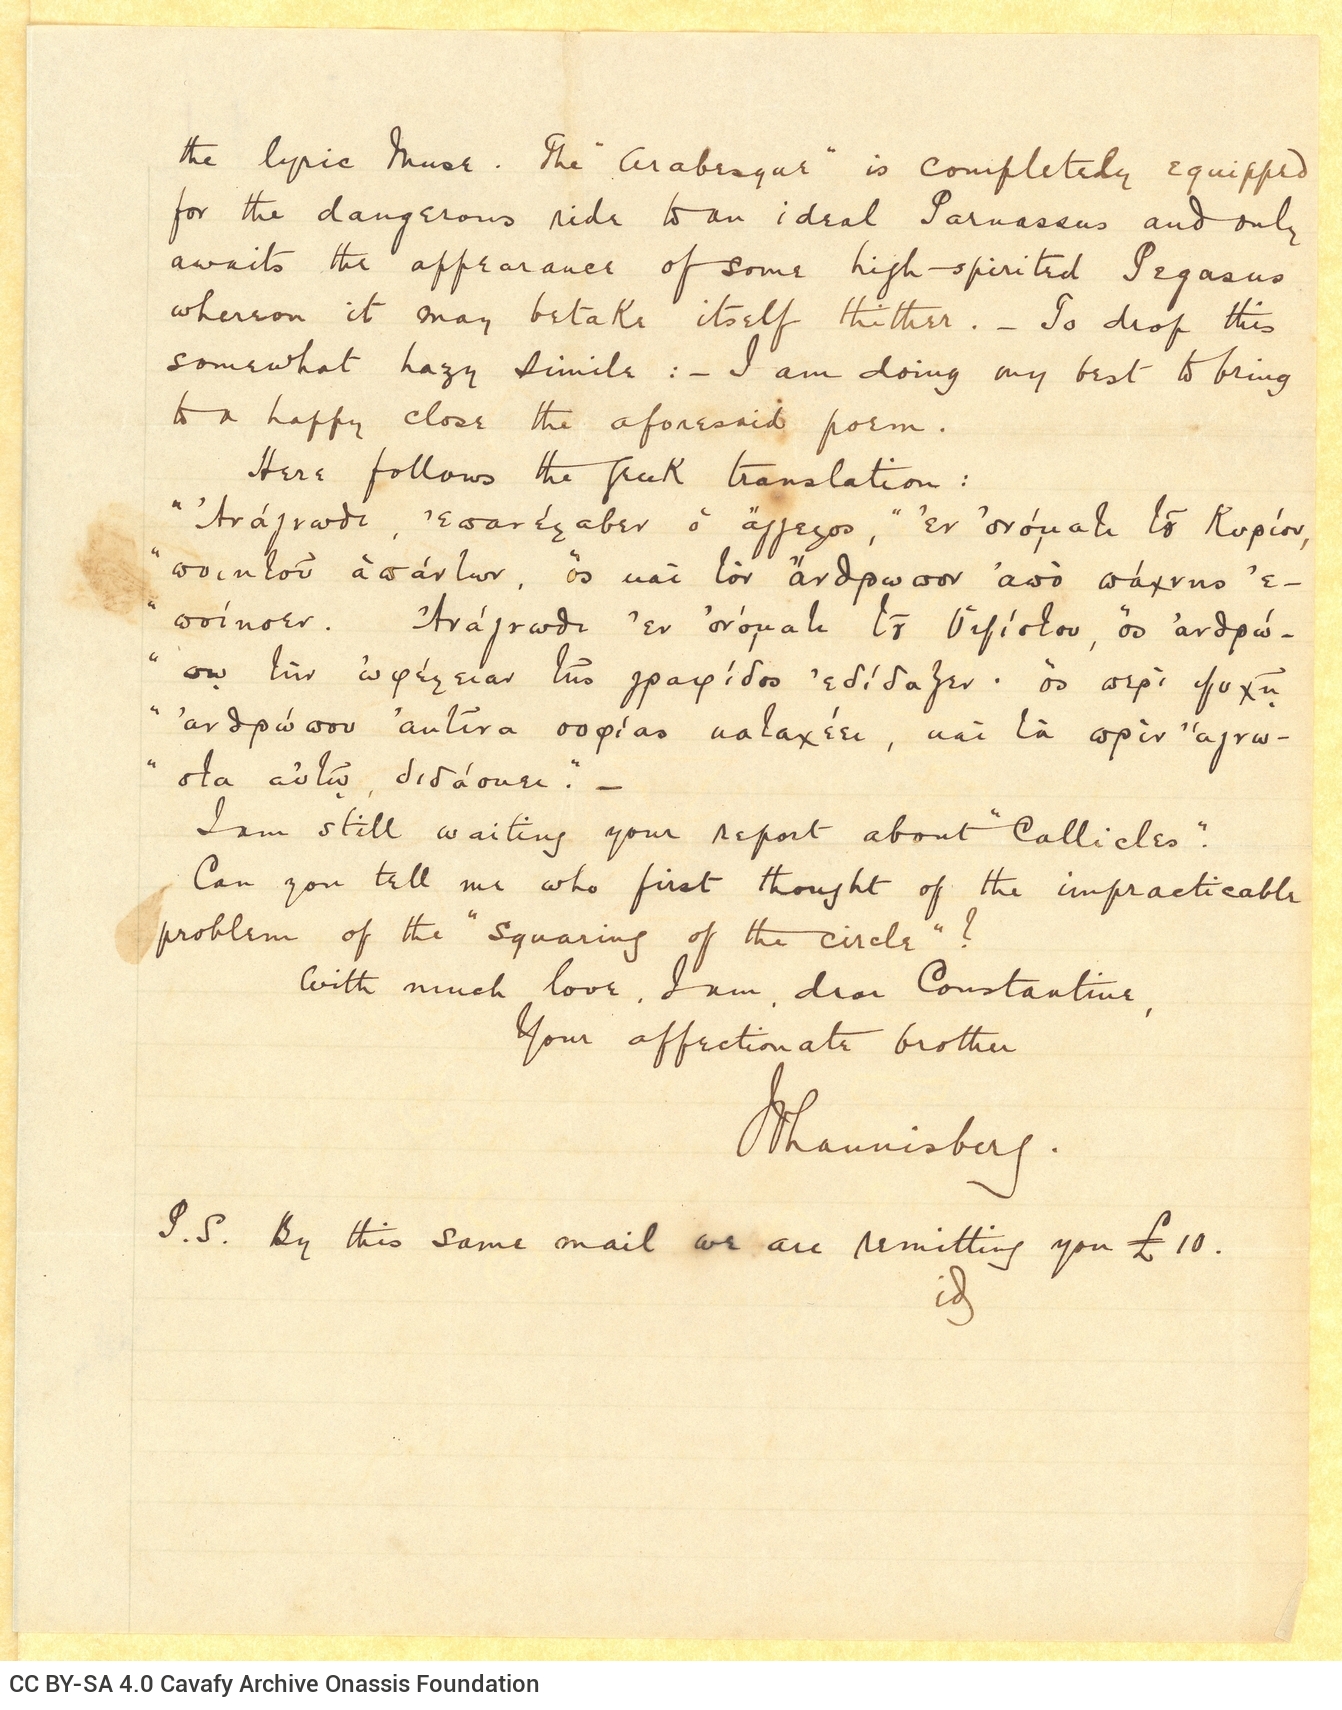 Handwritten letter by John Cavafy to C. P. Cavafy on the first and third pages of double sheet letterhead of R. J. Moss & Co.